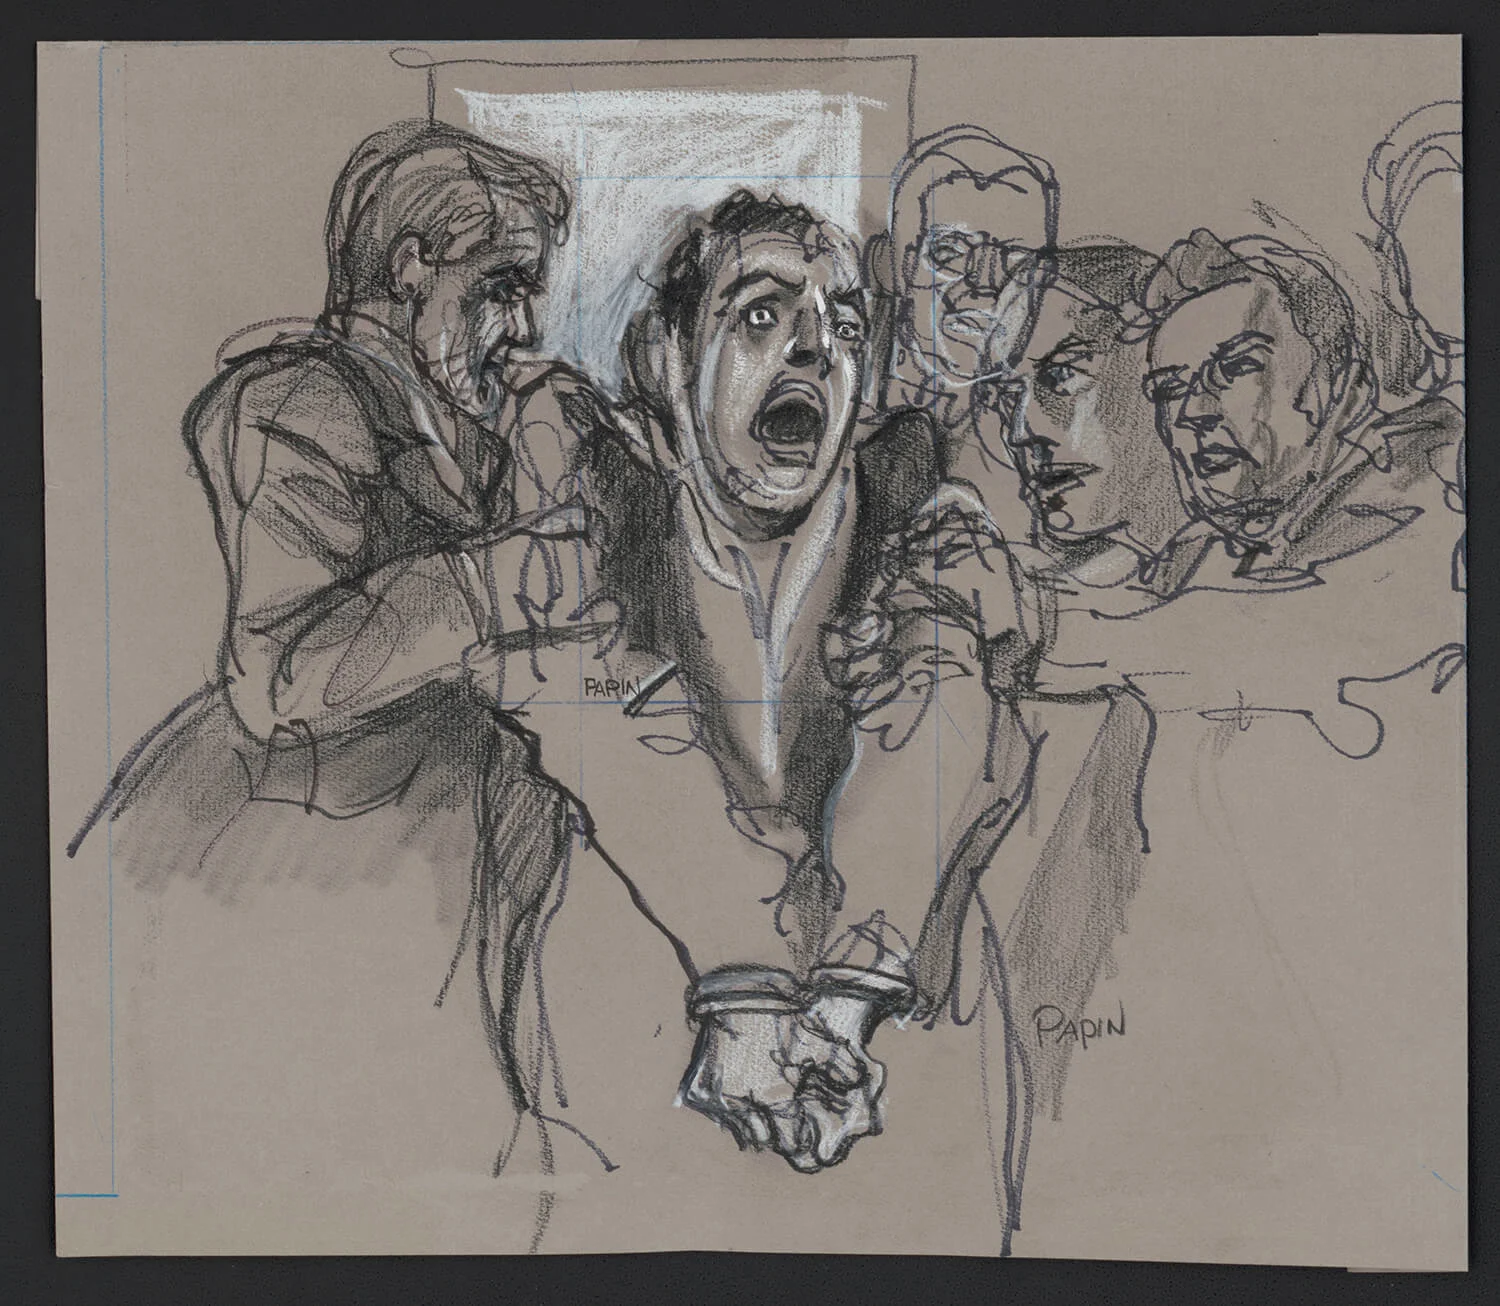 David Berkowitz screams obscenities as guards struggle to drag him from the courtroom, 1978. Image courtesy Joseph Papin / Library of Congress, Prints & Photographs Division